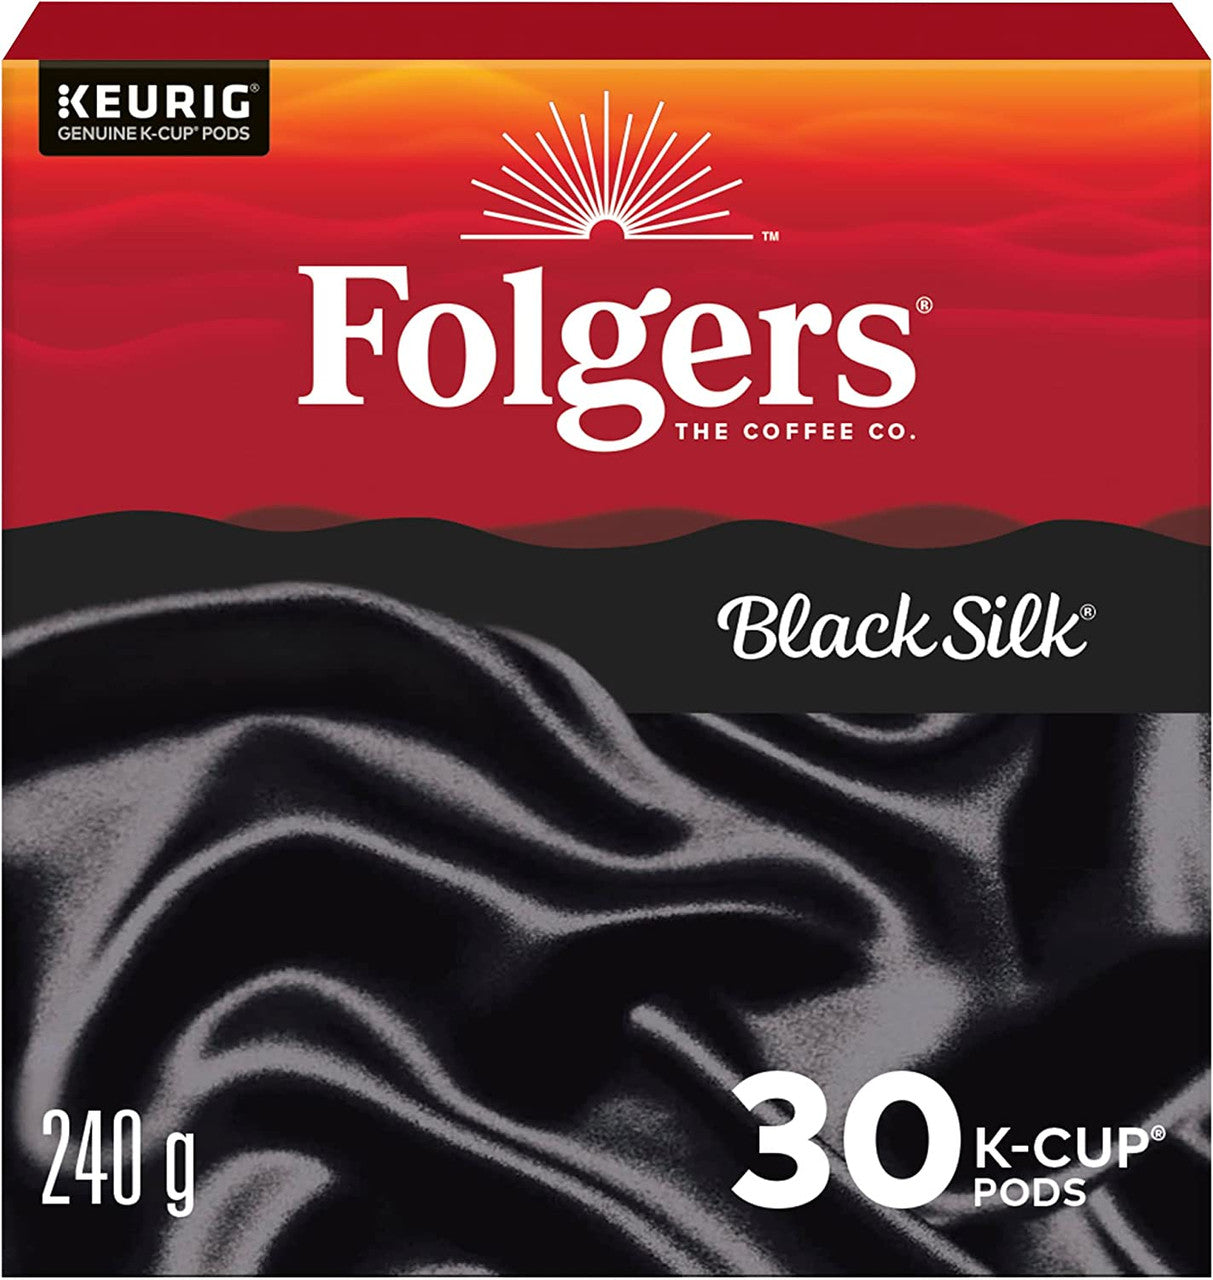 Folgers Black Silk Coffee K-cups, 30 Count, 240g/8.4 oz. Box {Imported from Canada}